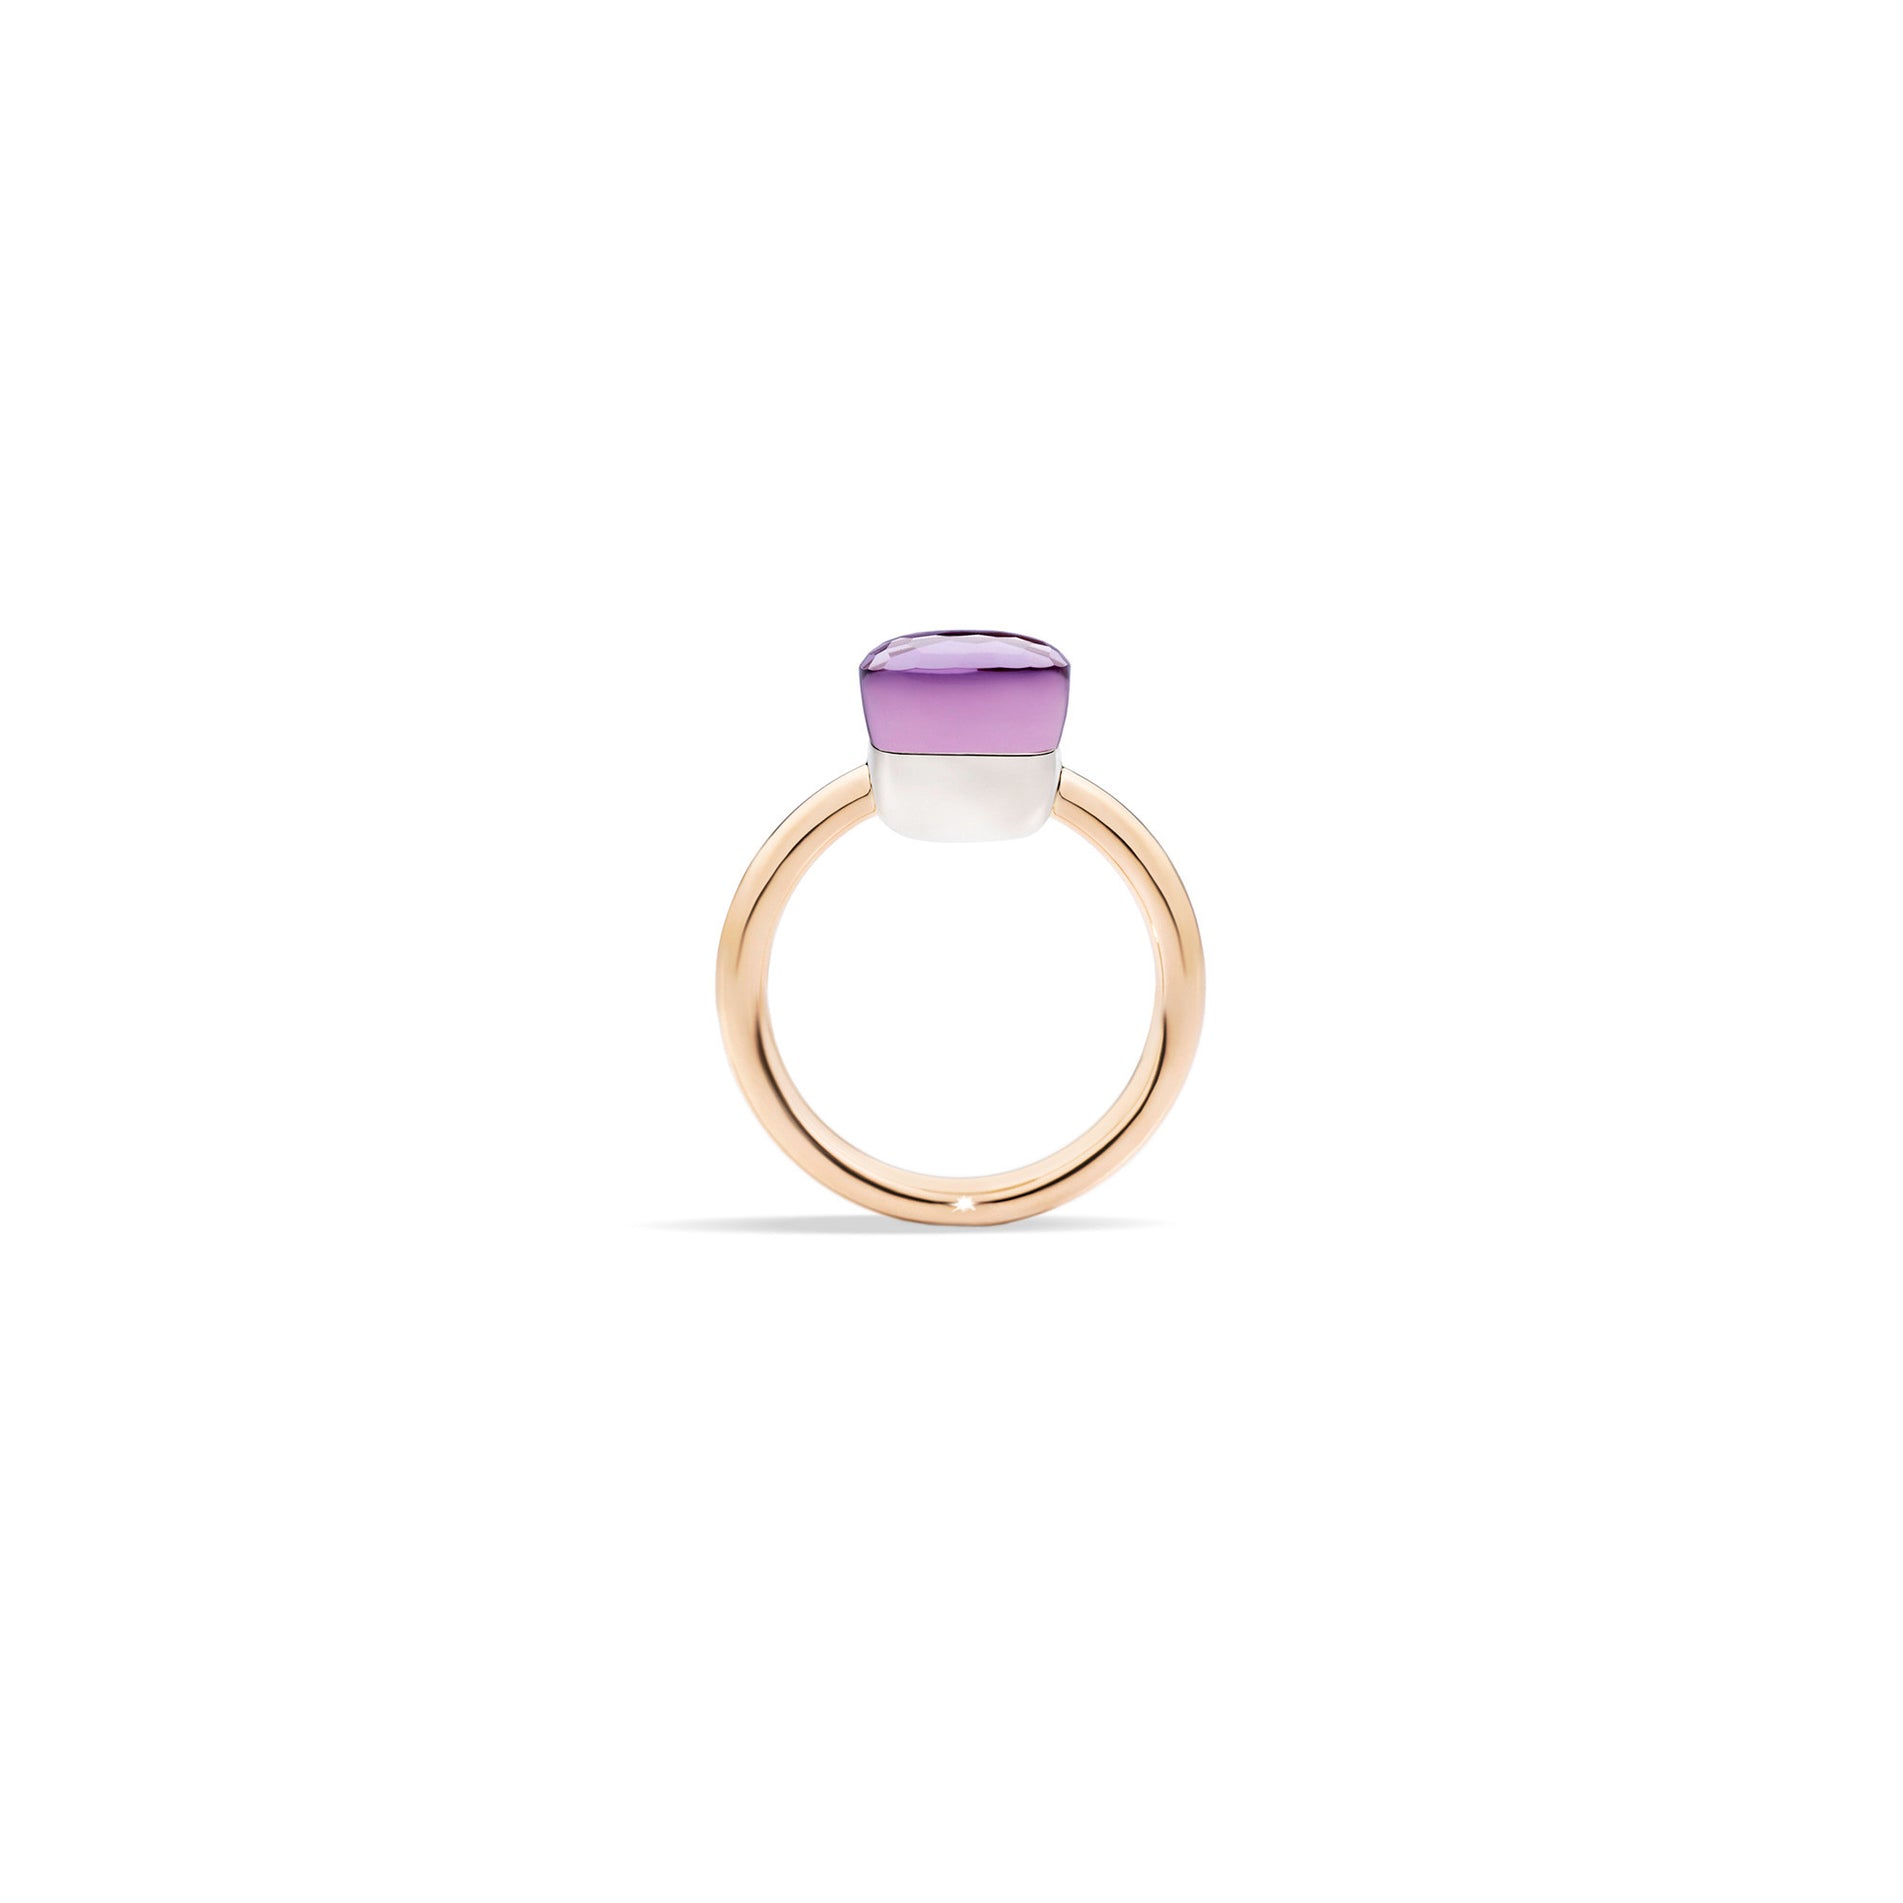 Nudo Petit Ring in 18k Rose Gold and White Gold with Amethyst - Orsini Jewellers NZ